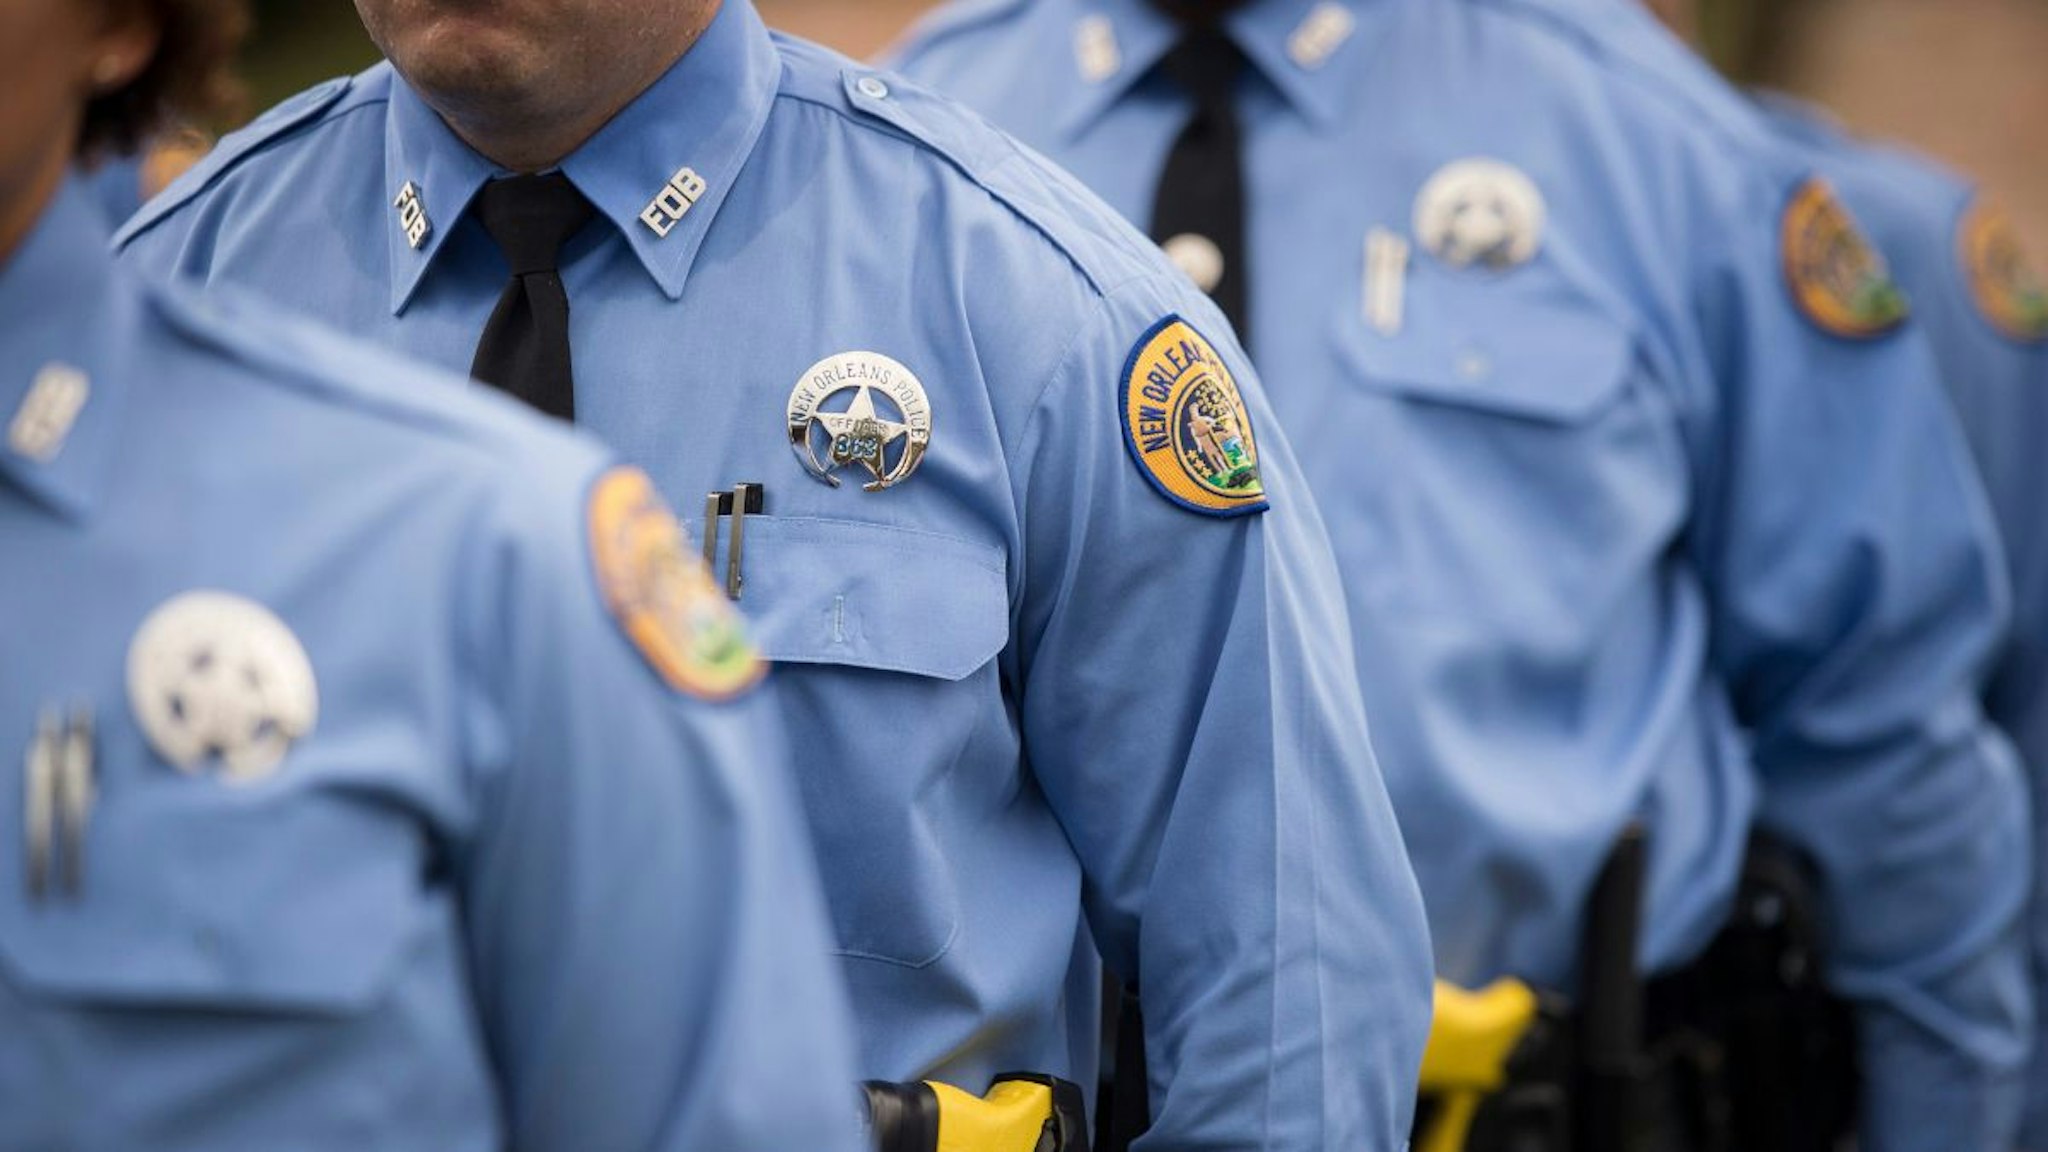 Twenty nine new New Orleans police officers stand during a pinning ceremony at the University of New Orleans as they graduate from the New Orleans Police Department's training academy in New Orleans, LA on Wednesday, September 02, 2015.